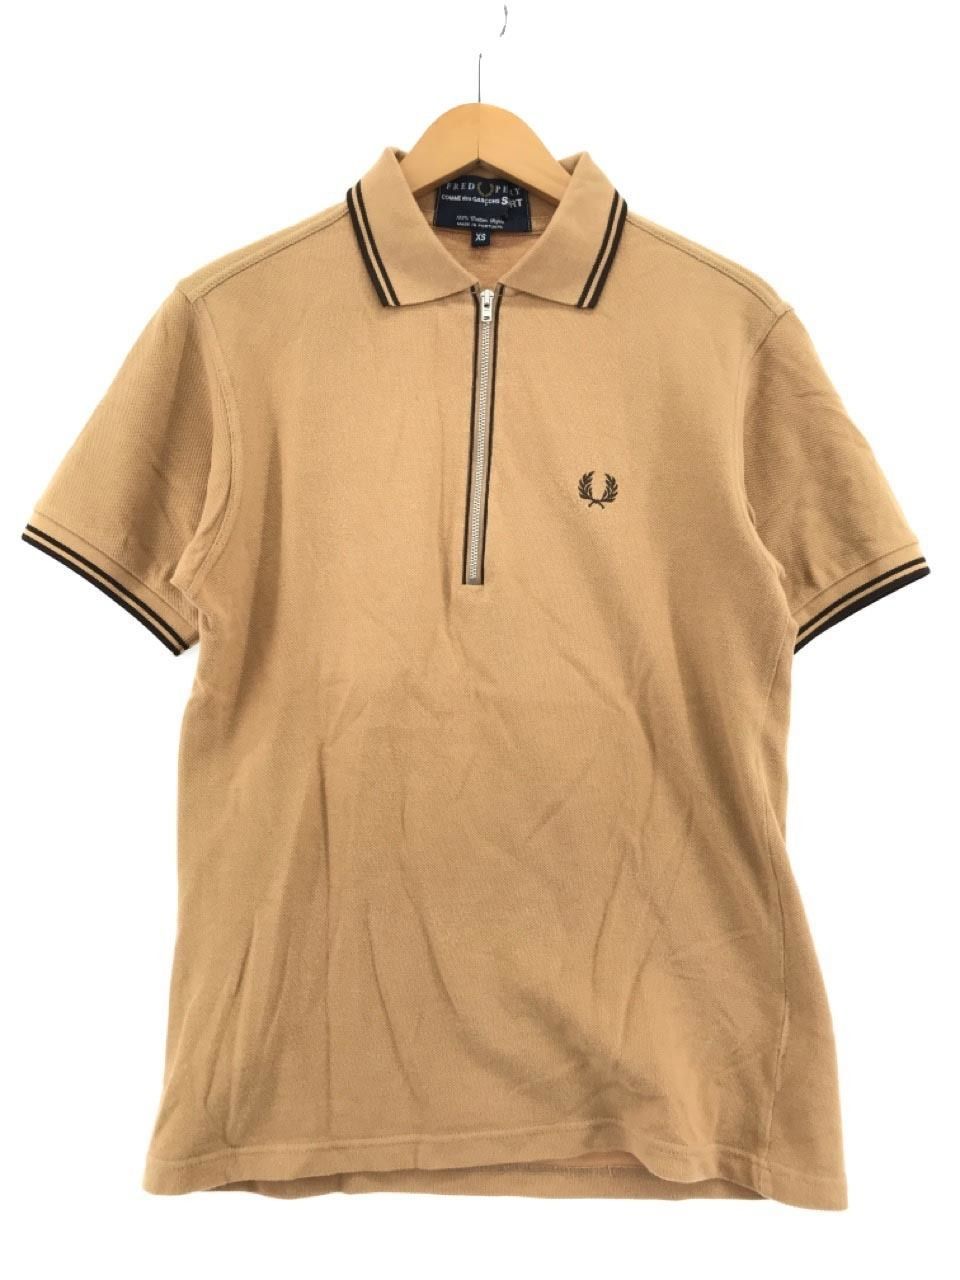 FRED PERRY COMME des GARCONS ポロシャツ XS ブラウン | www.pvi.ne